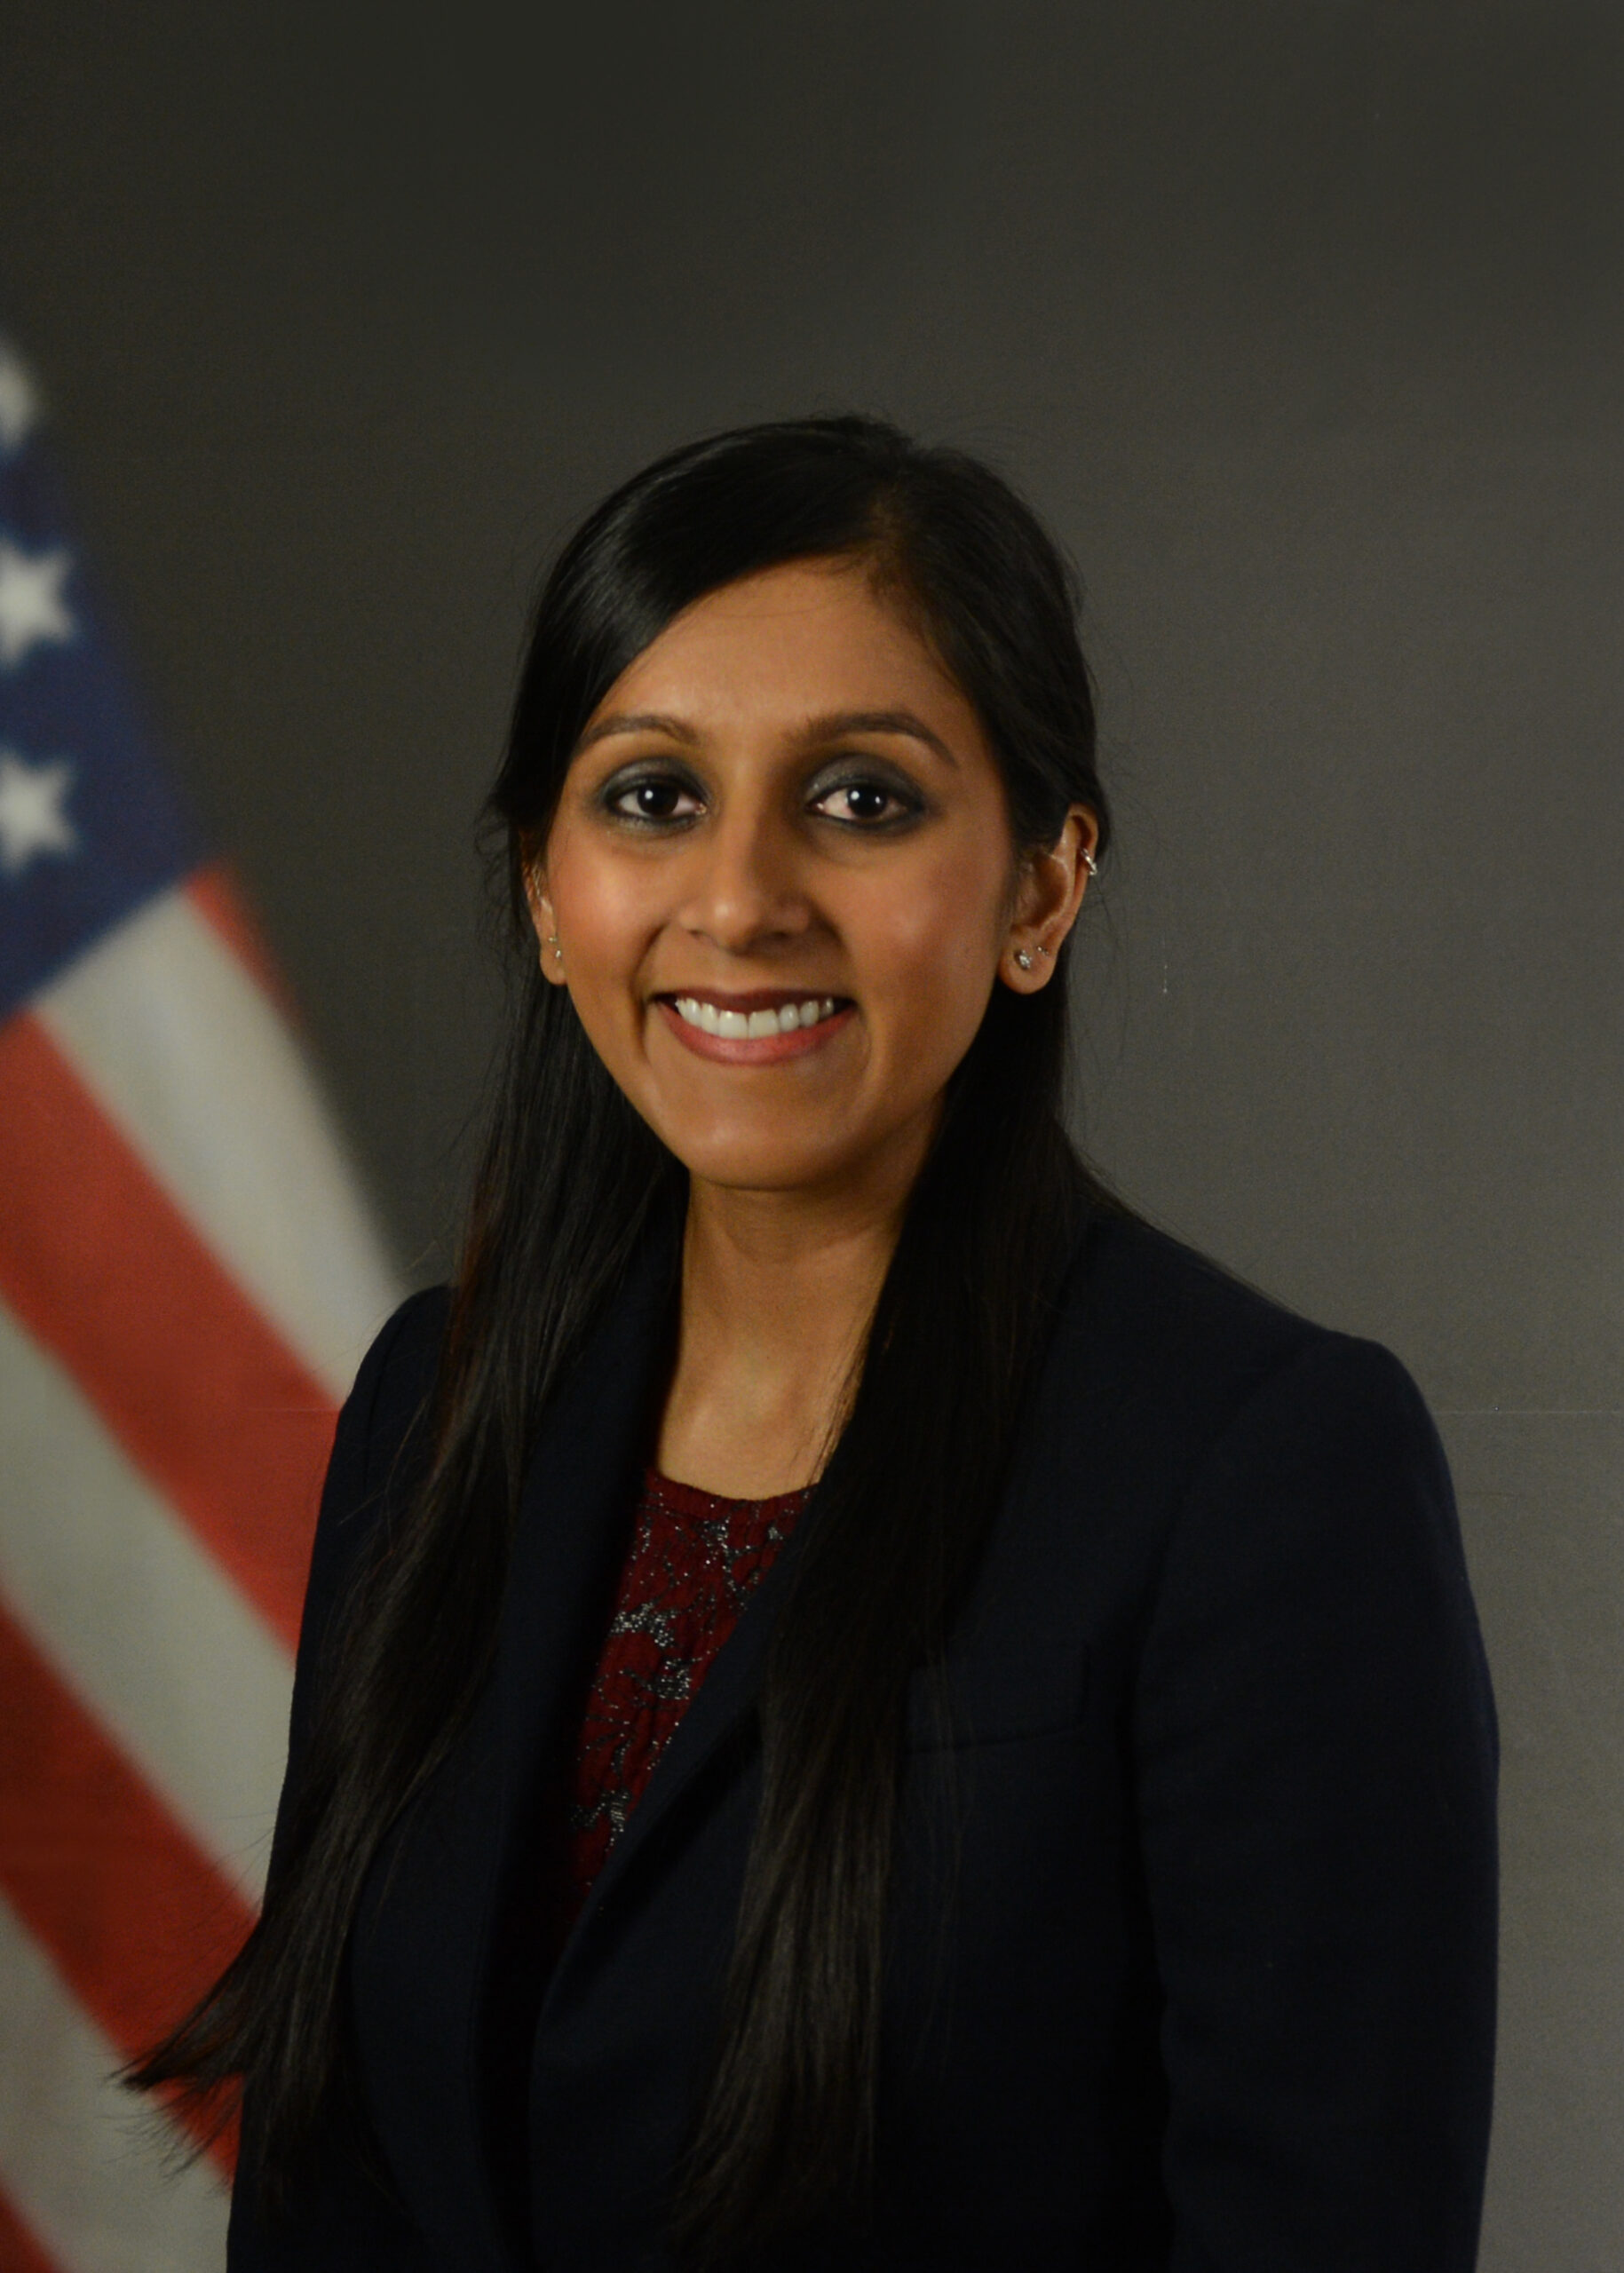 Dr. Tulsi Patel smiling and wearing a suit.